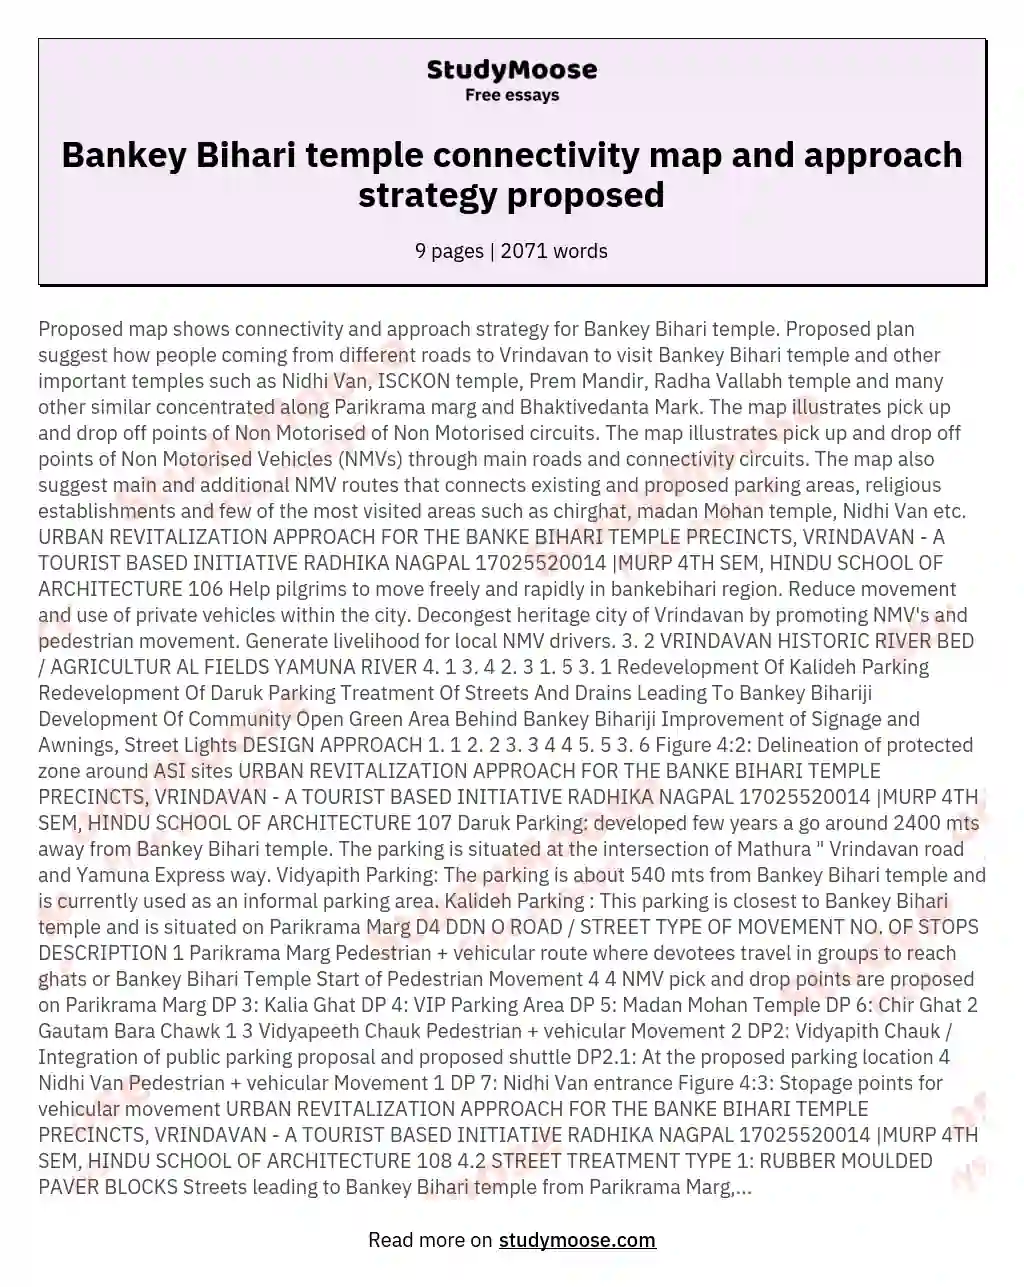 Bankey Bihari temple connectivity map and approach strategy proposed essay